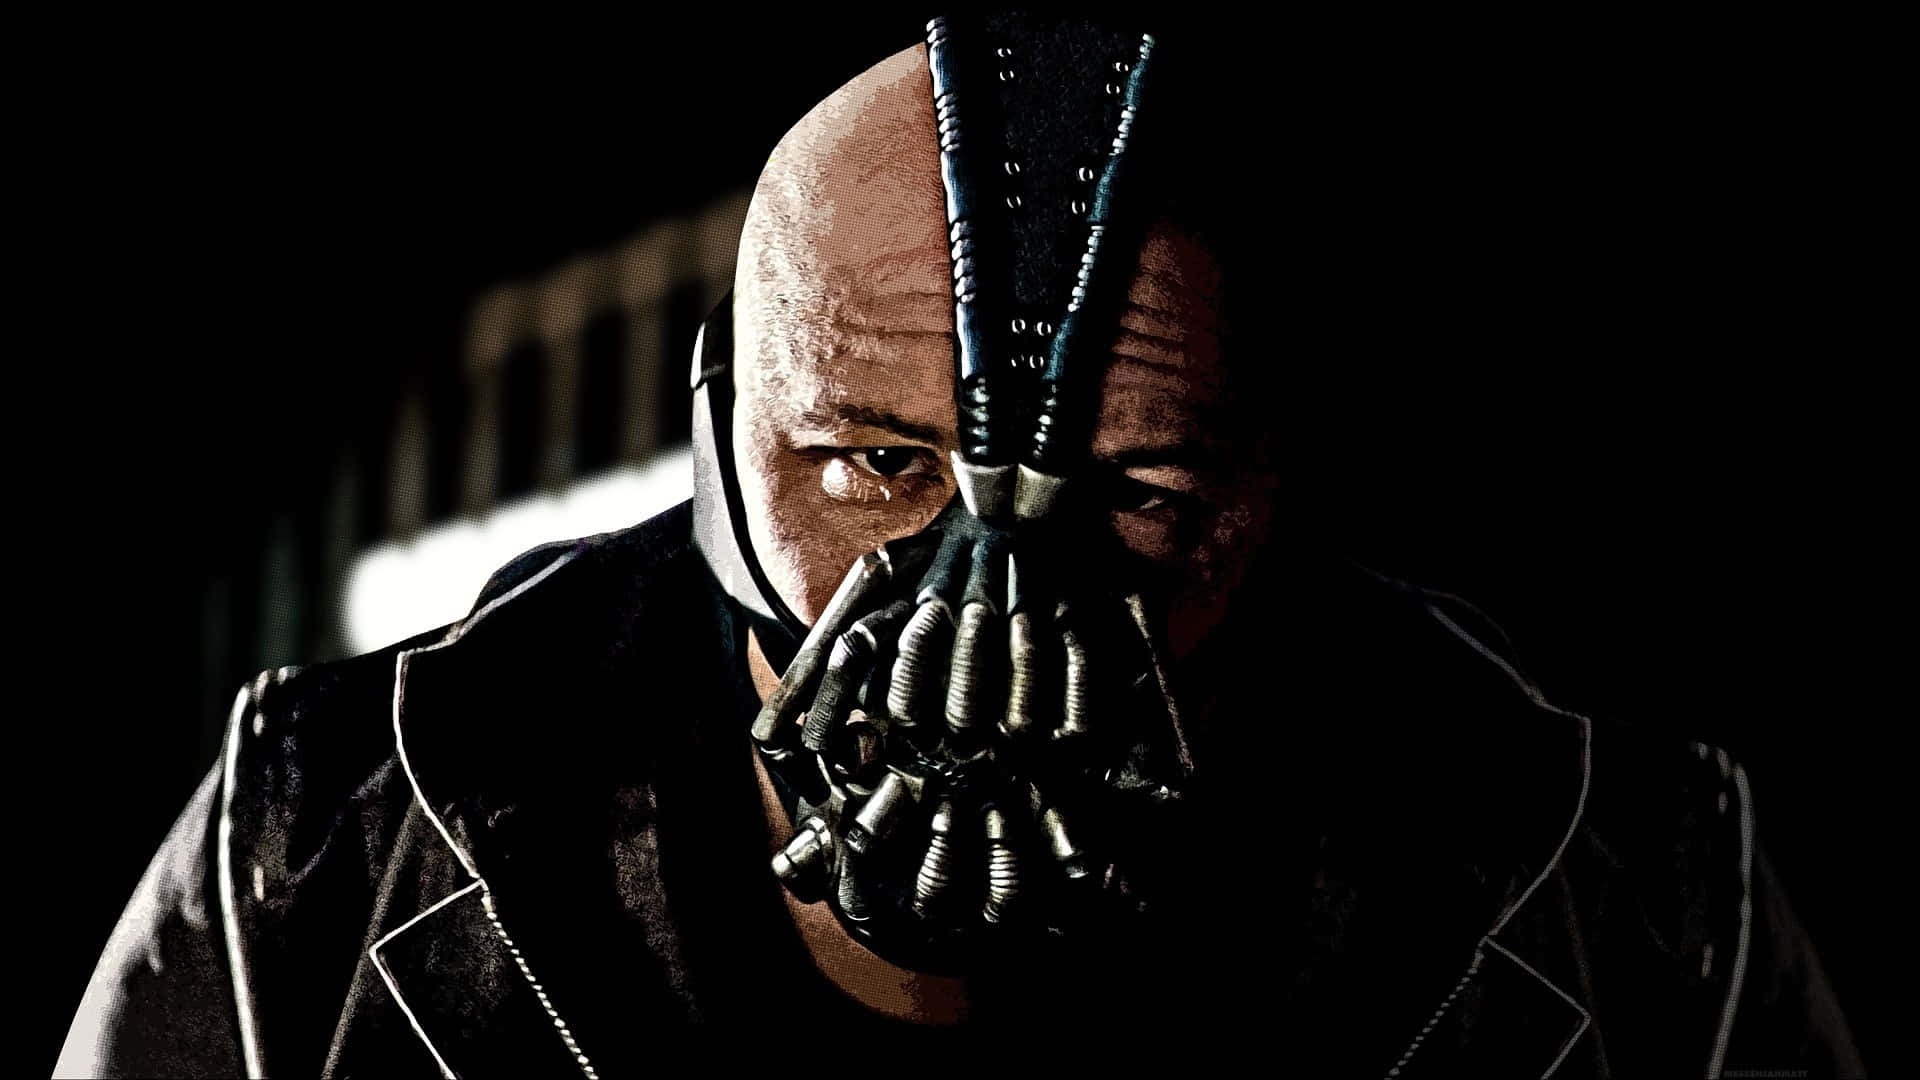 Bane Broods Into The Night As He Plans His Next Move Against Gotham.